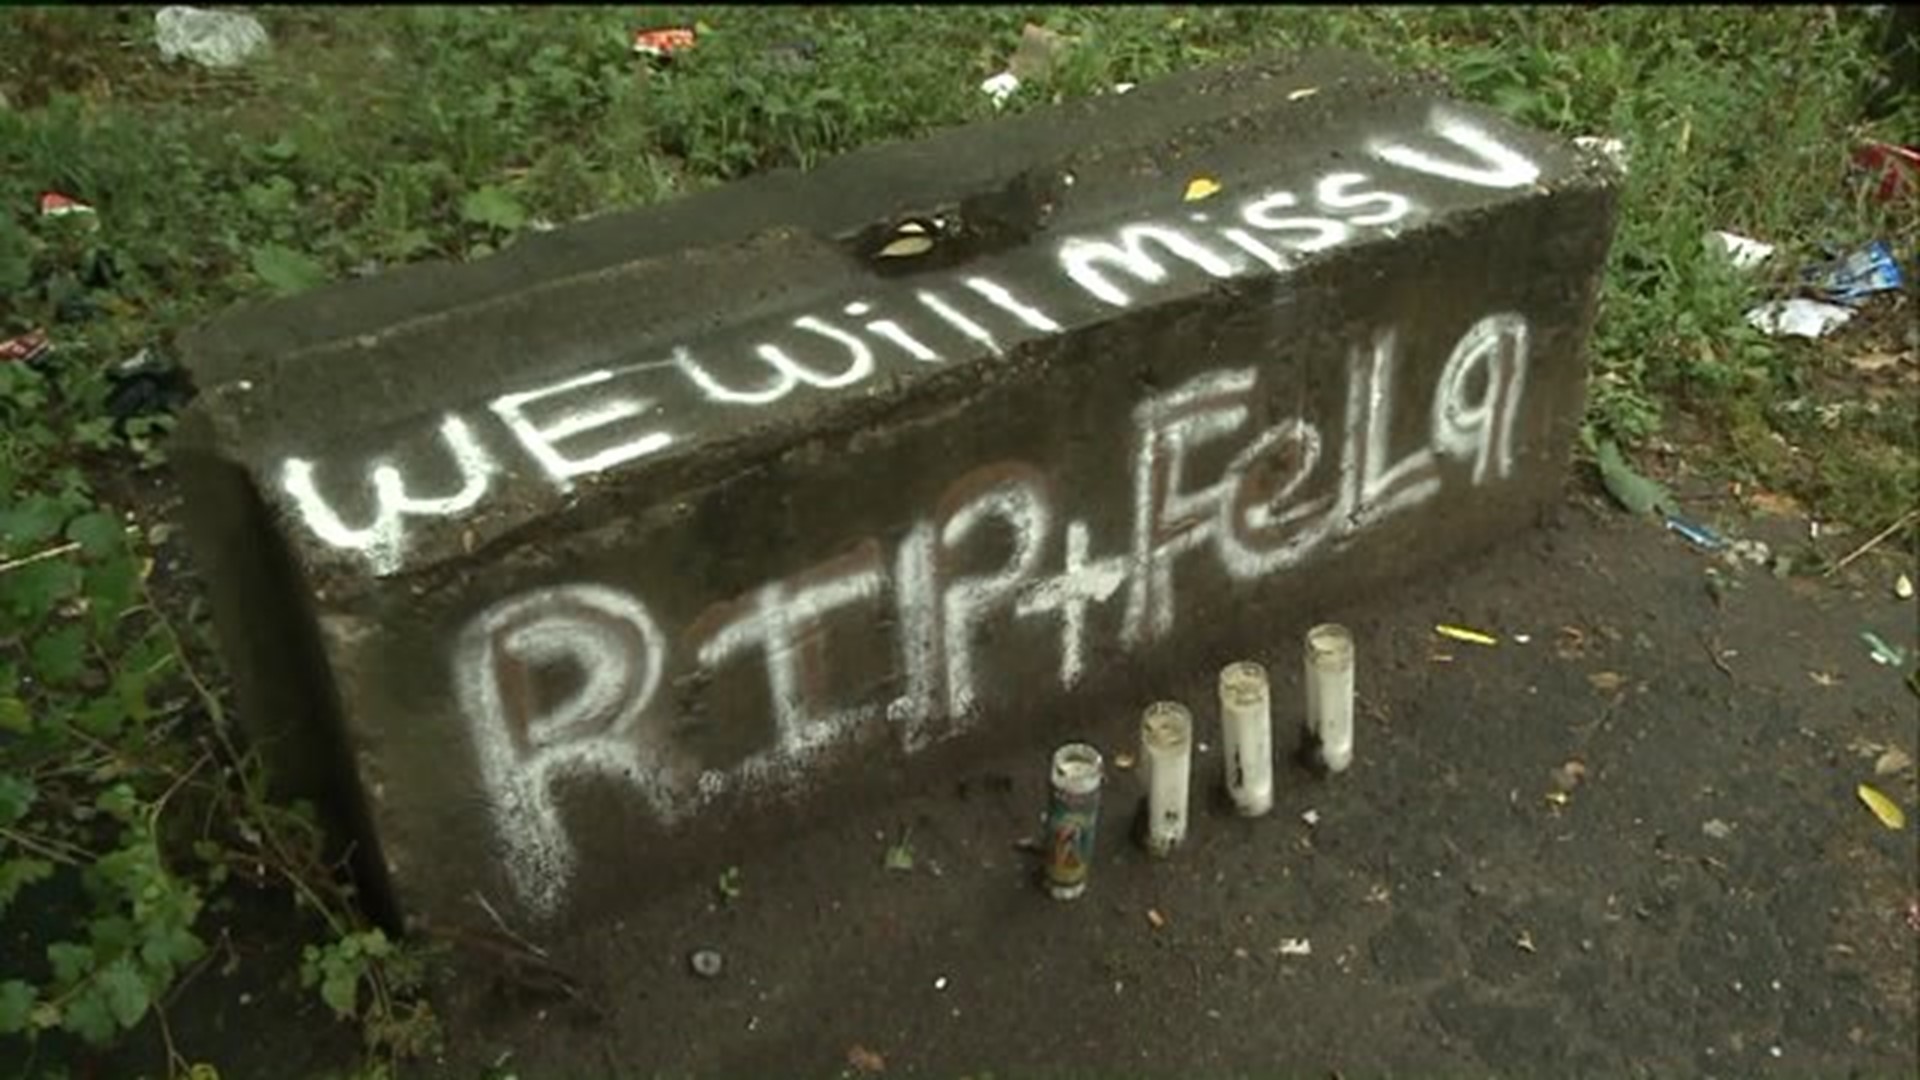 Neighborhood mourns loss after hit-and-run